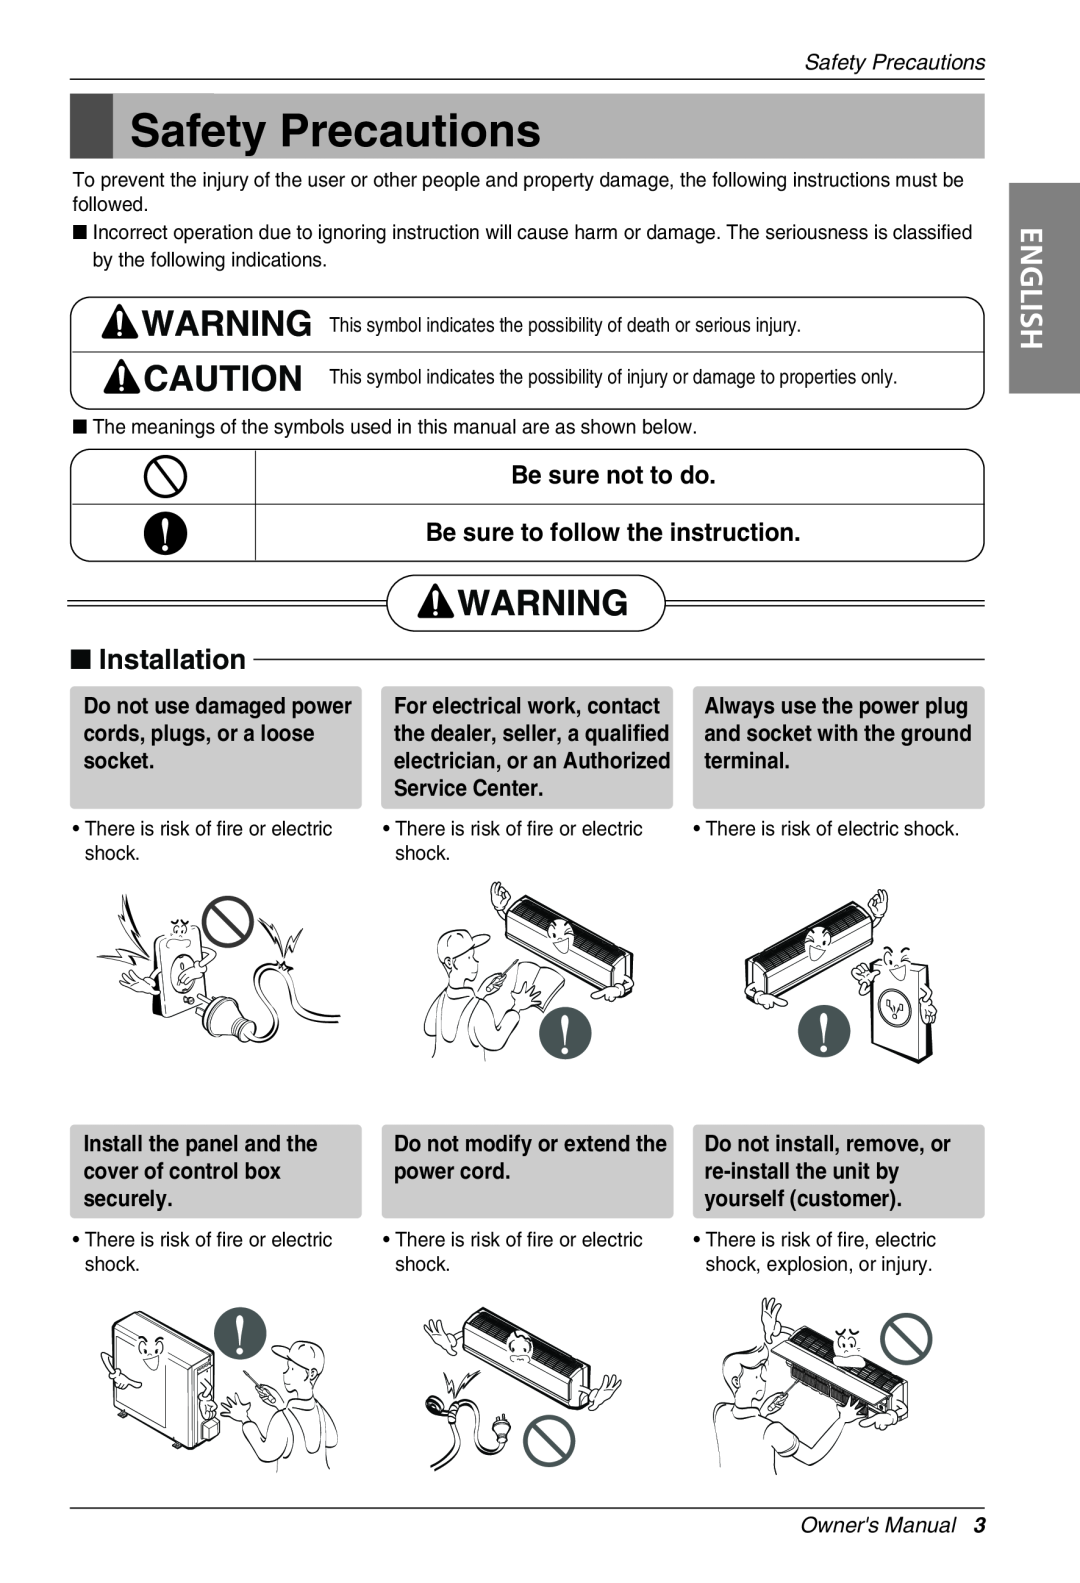 Beko LG-BKE7650D, LG-BKE7700D, LG-BKE 7800D owner manual Safety Precautions, English, Installation, Be sure not to do 